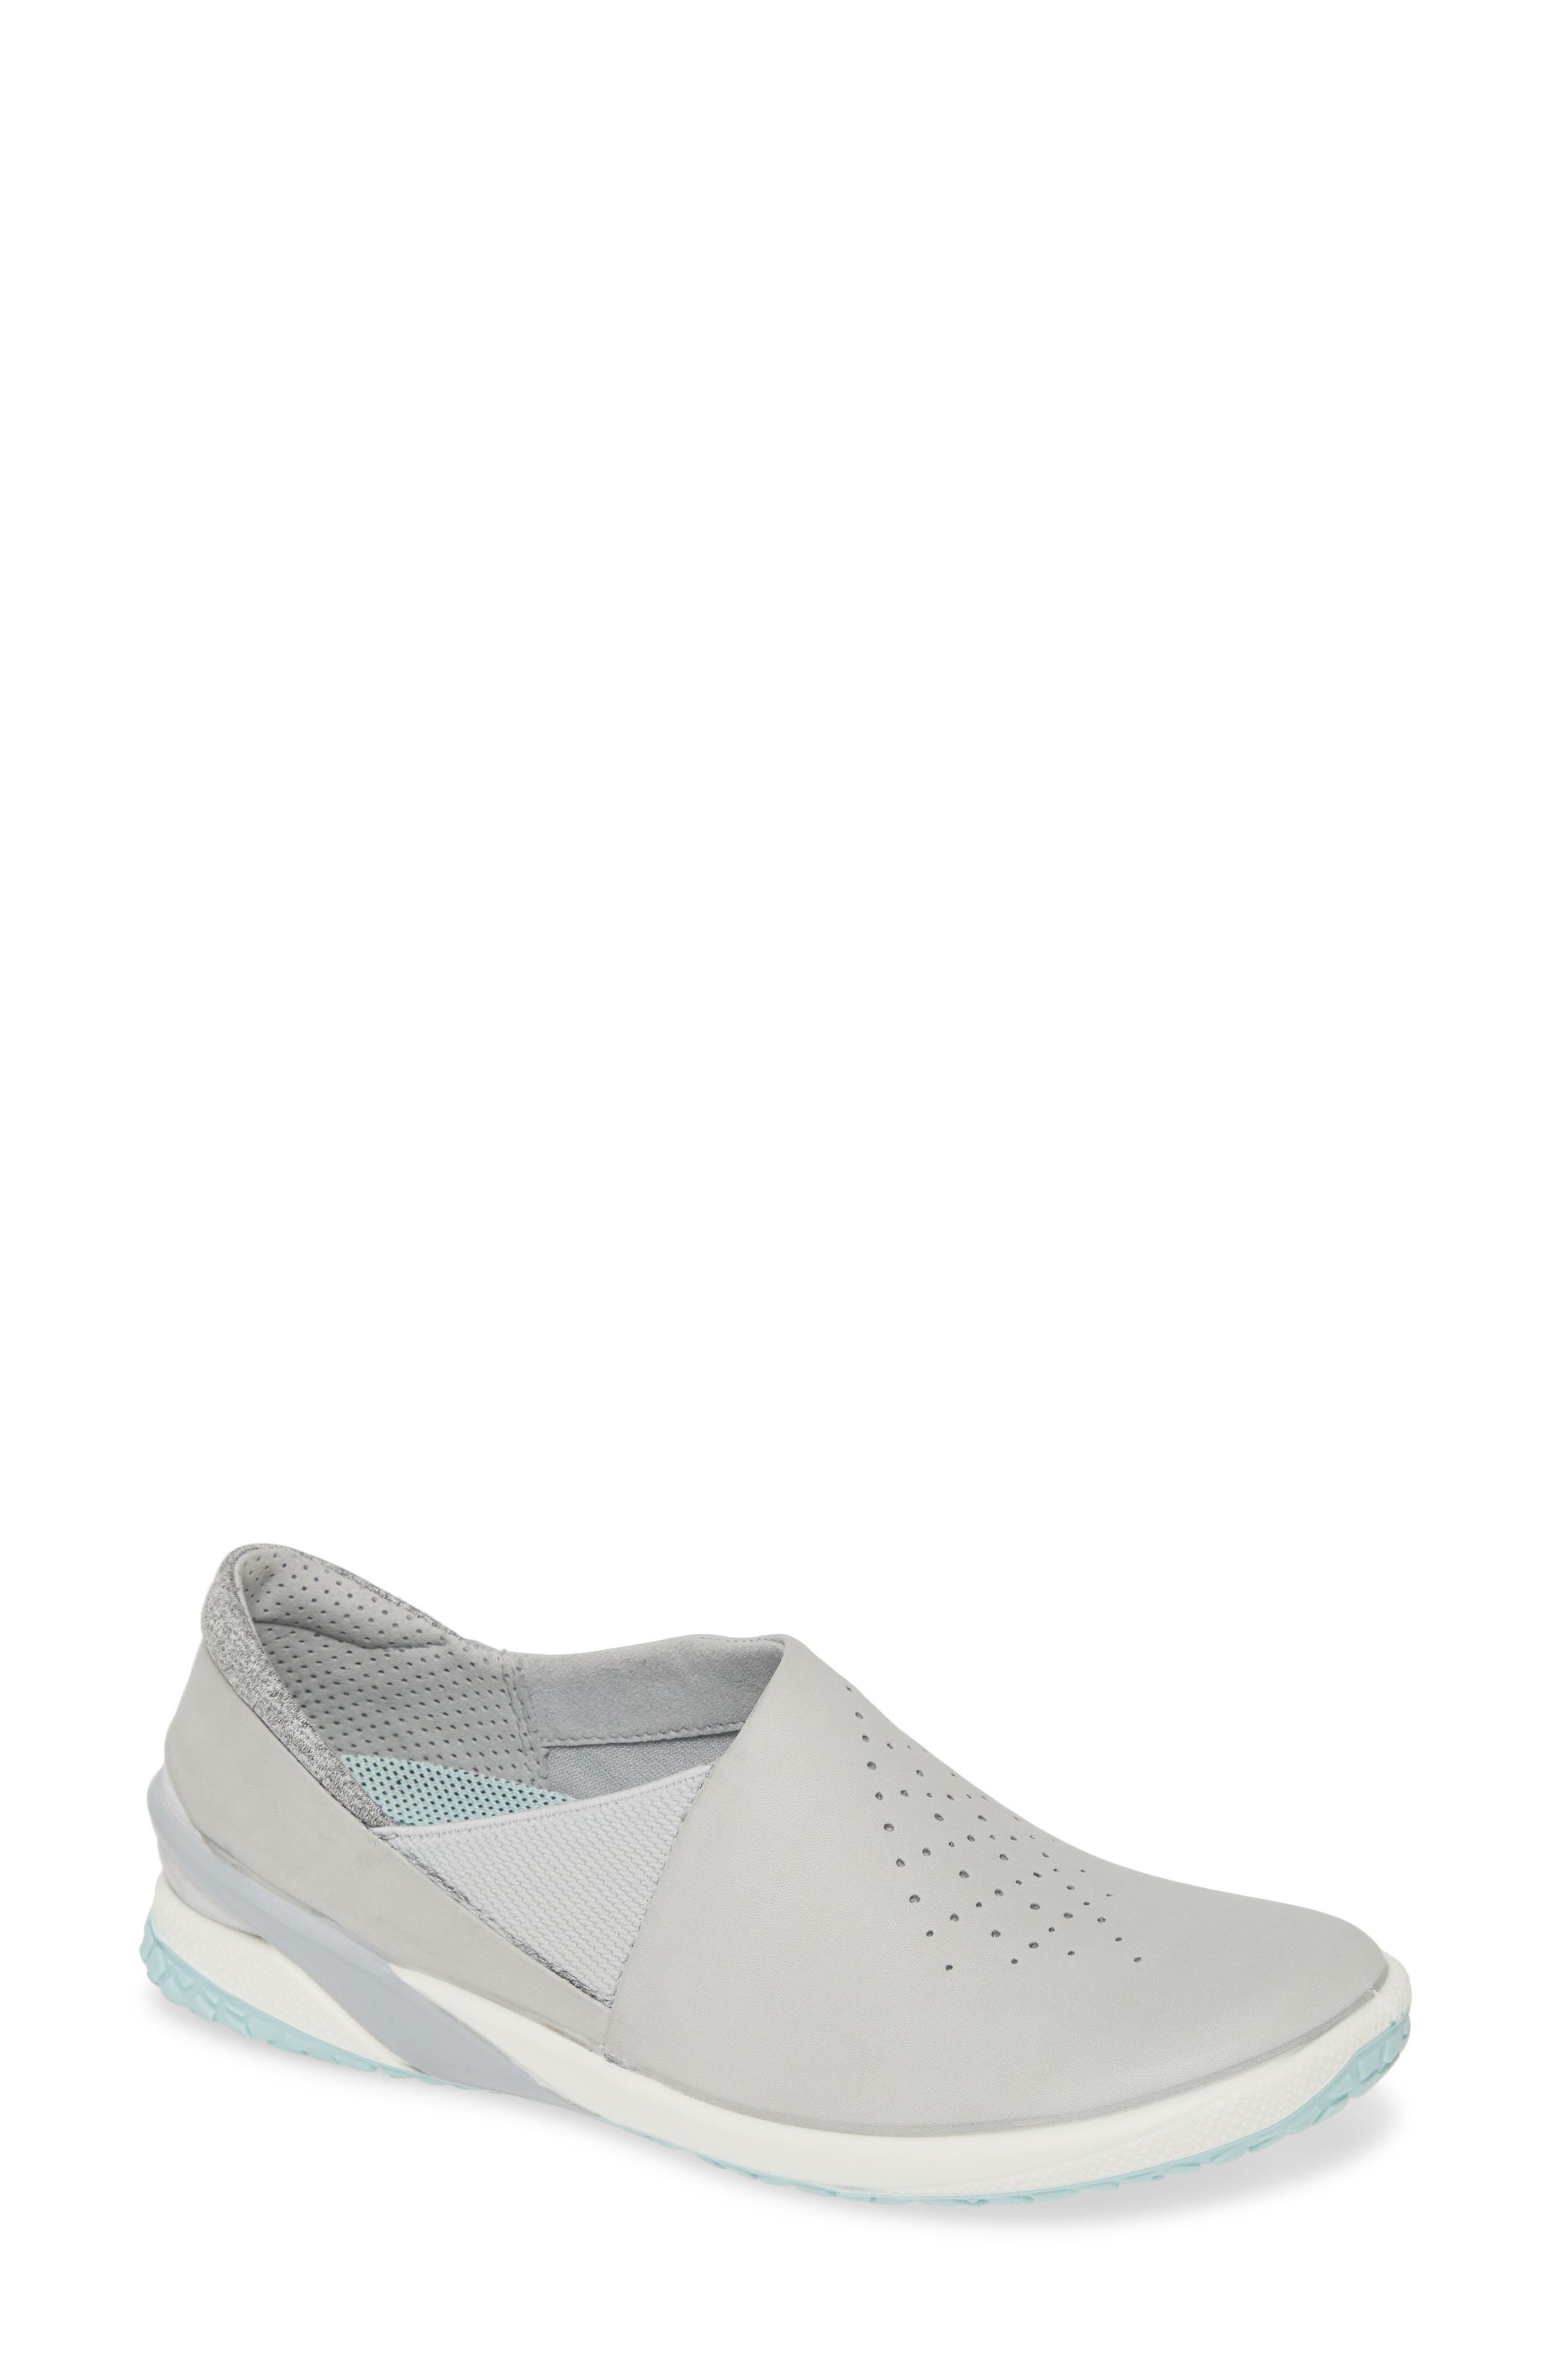 nordstrom shoes ecco womens